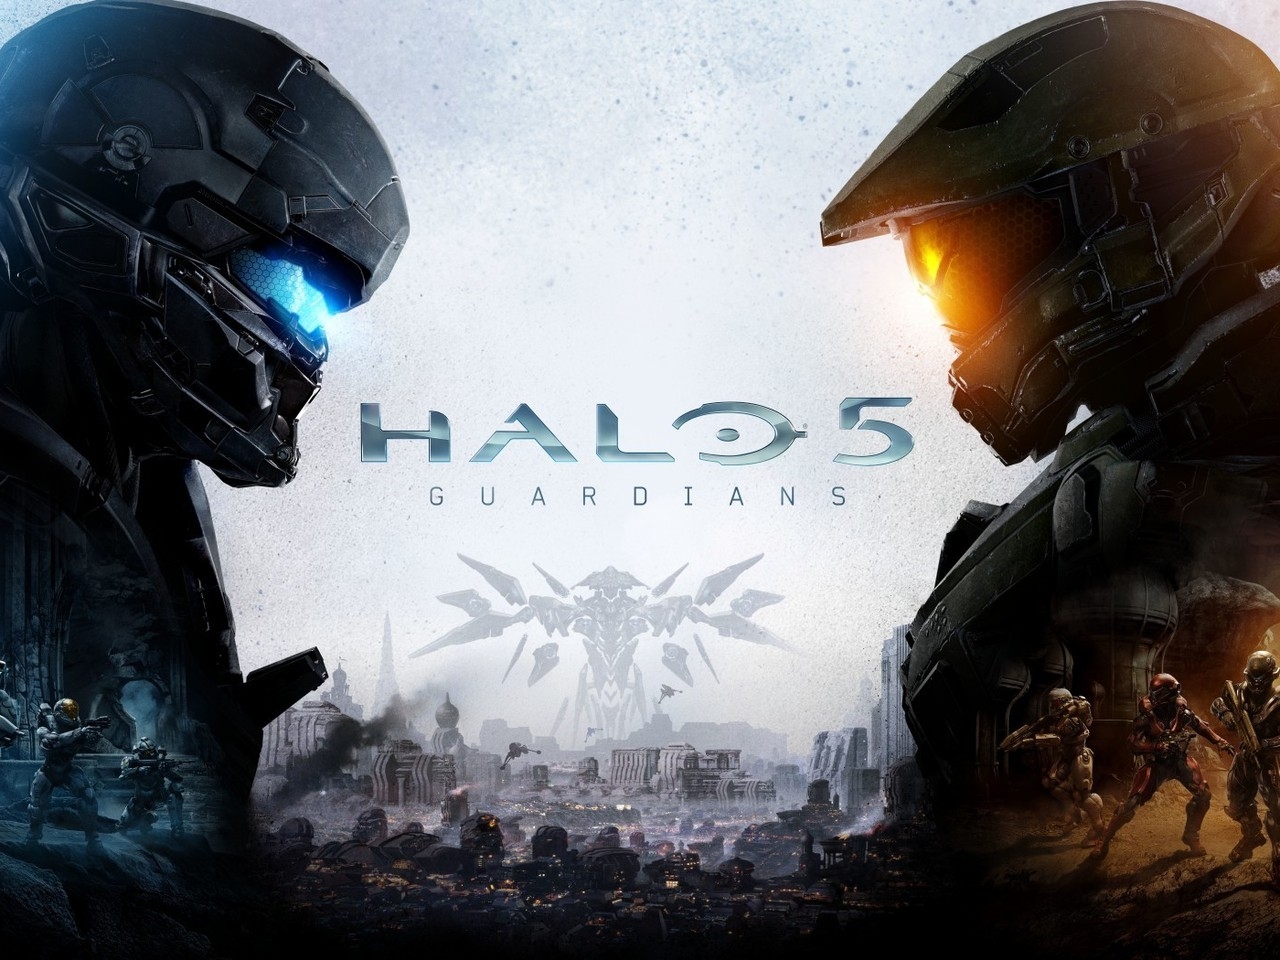 Halo 5 Guardians Game for 1280 x 960 resolution